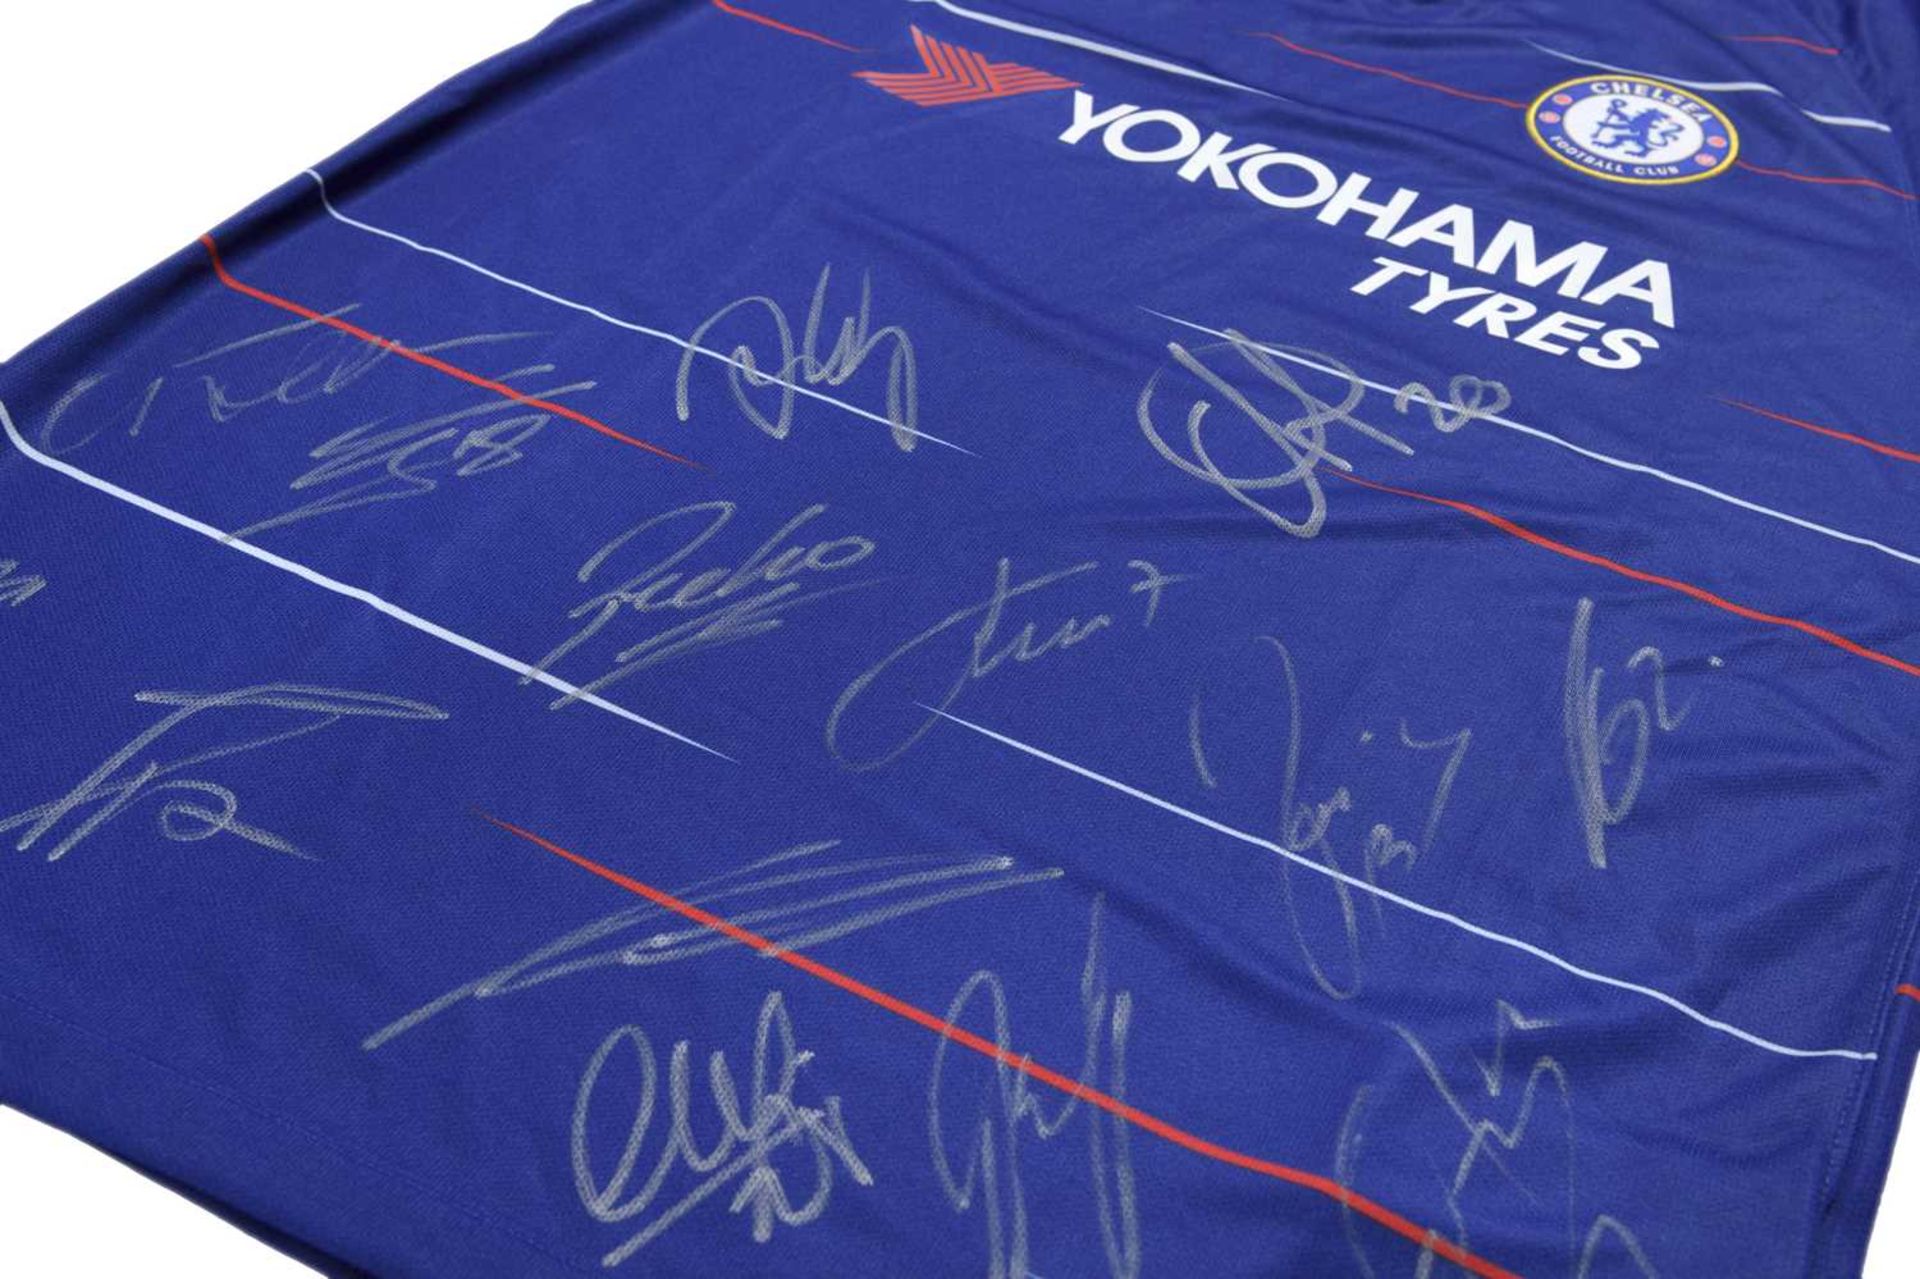 Chelsea FC Football Shirt Signed by the 2018/2019 Chelsea Team The shirt comes with a certificate of - Image 2 of 2